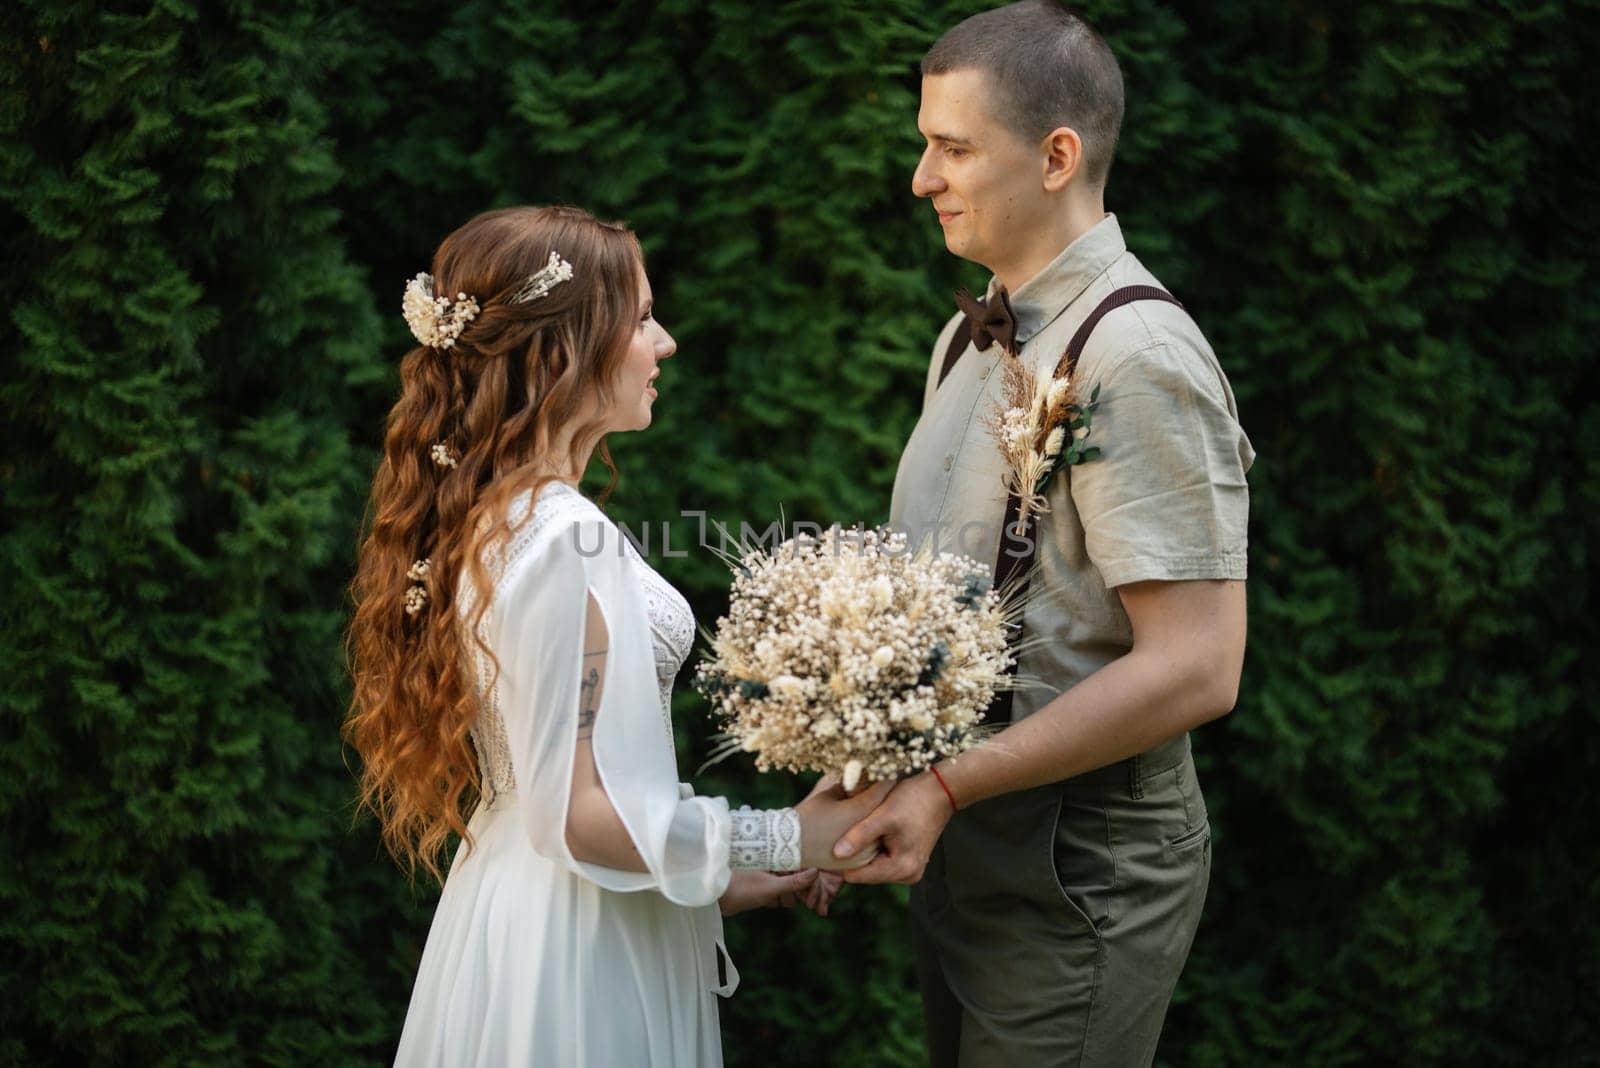 wedding walk of the bride and groom in a coniferous park in summer